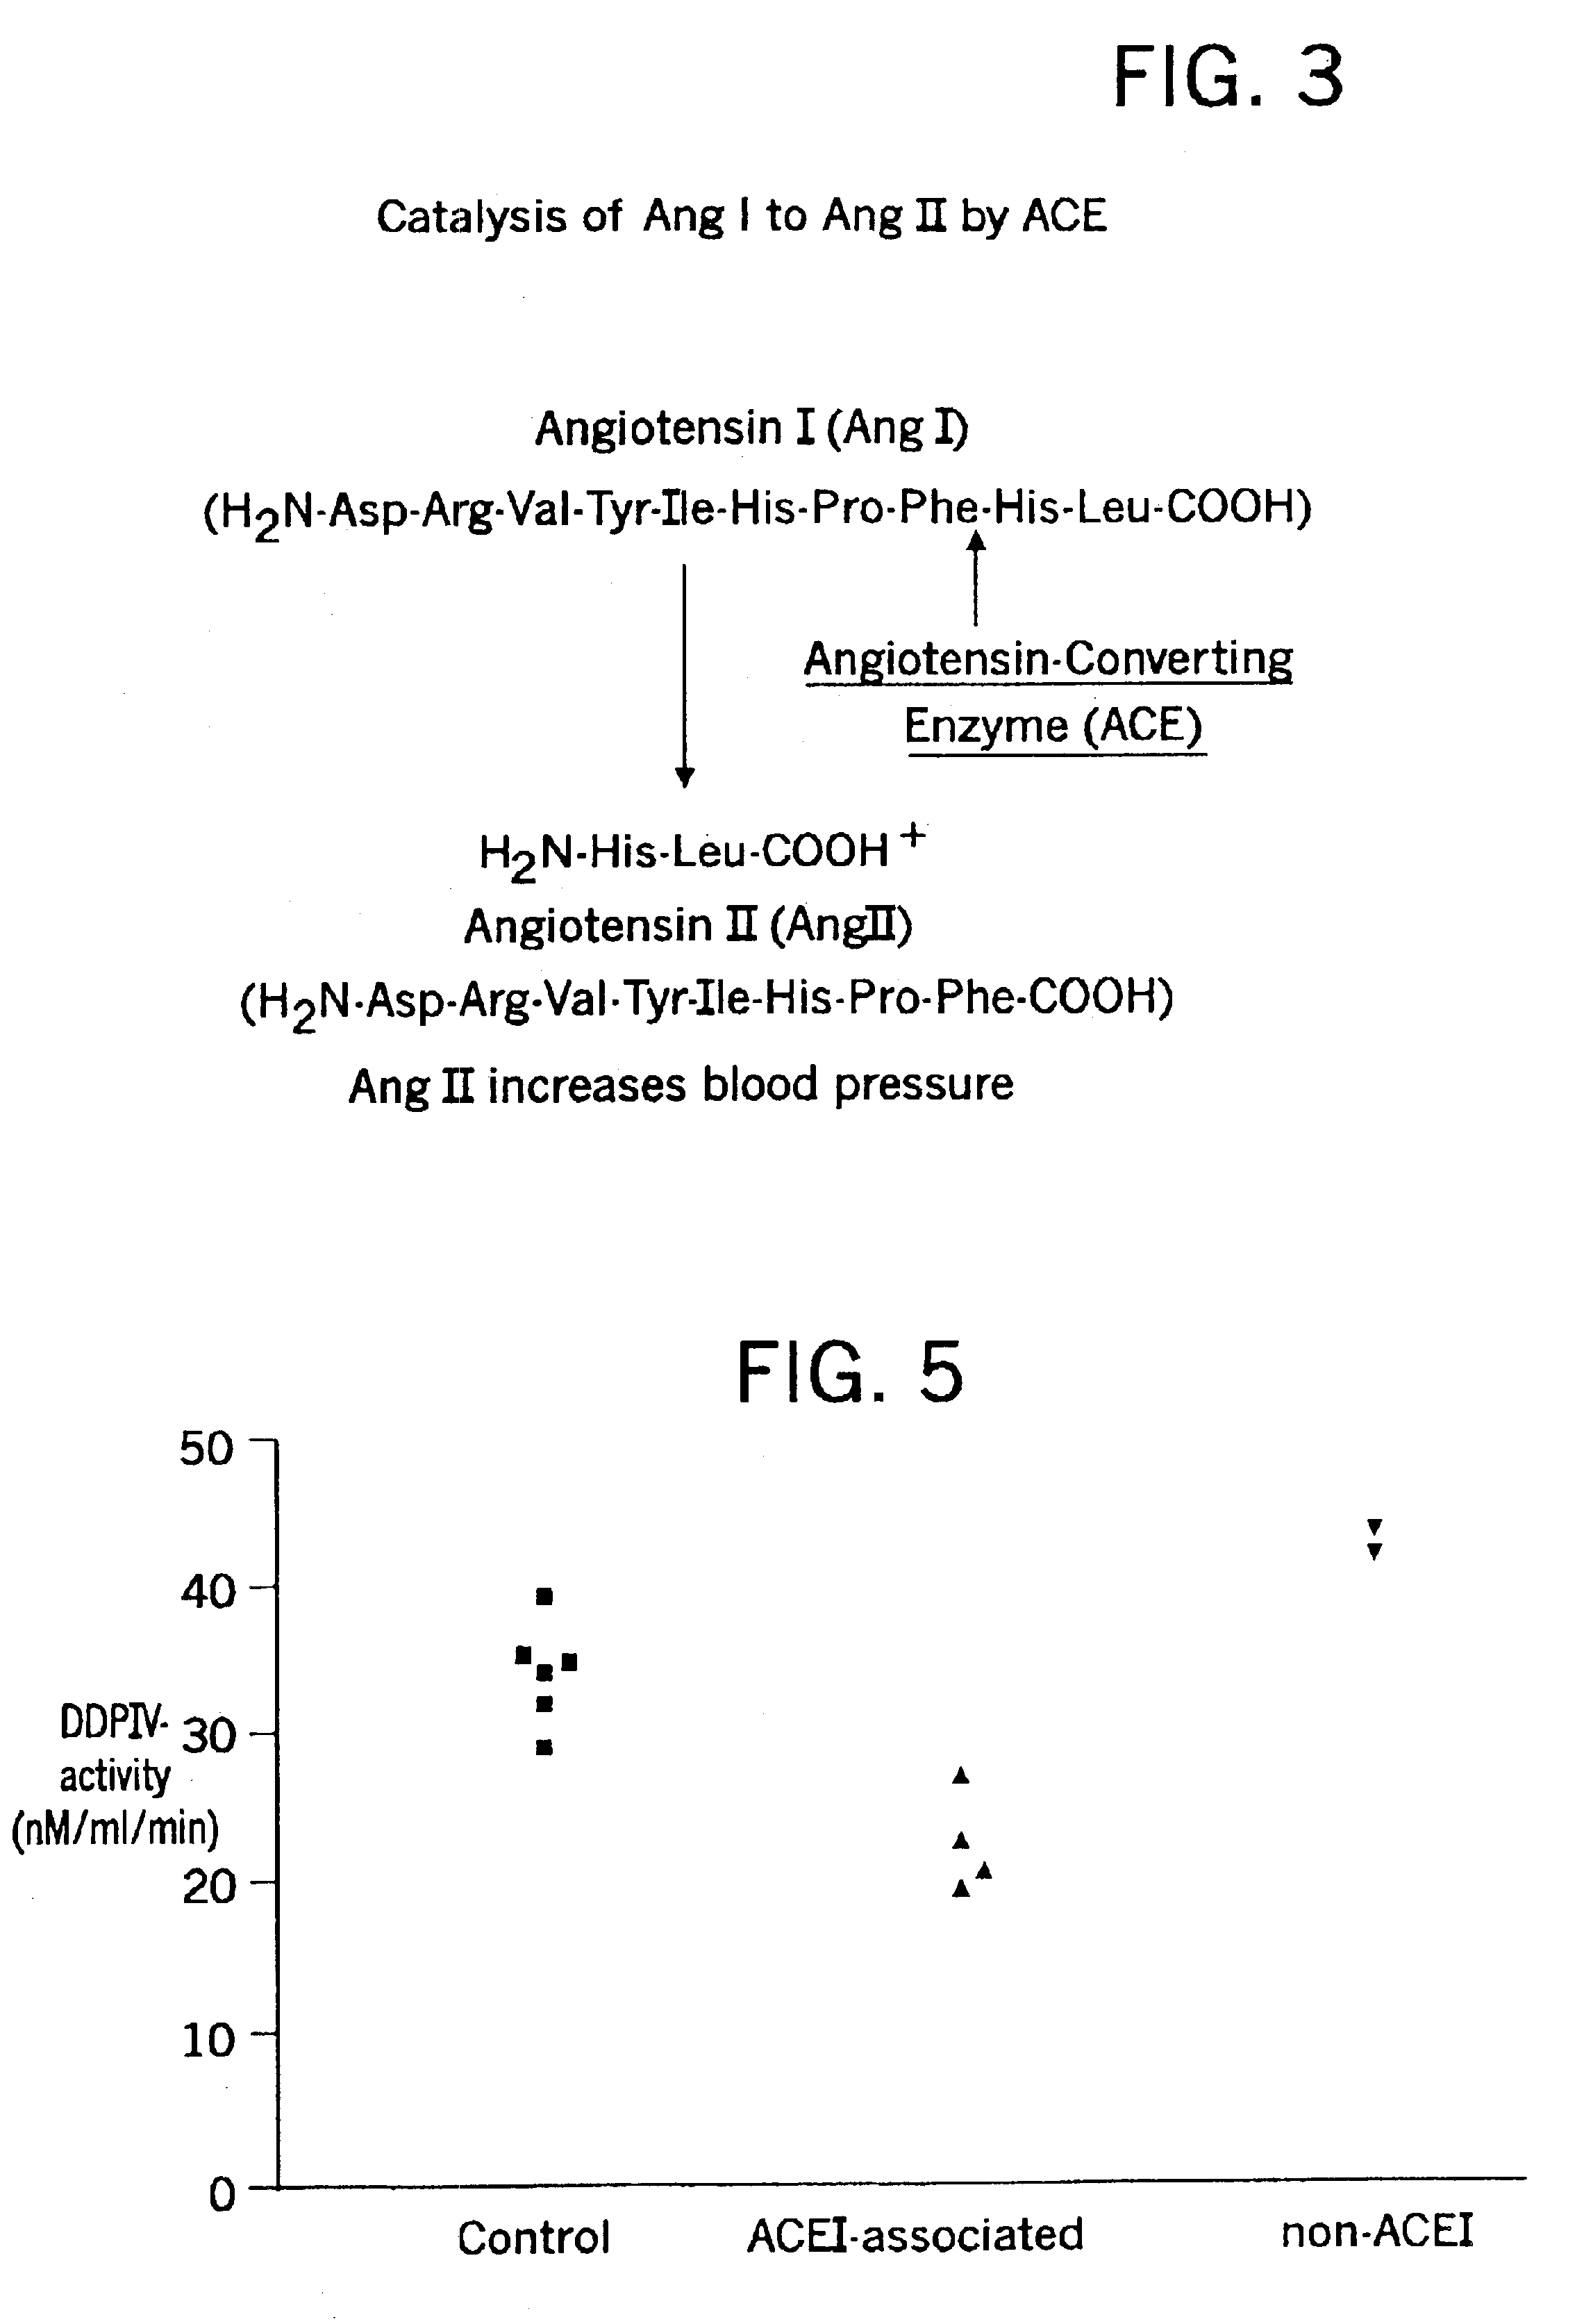 Methods for identifying contraindications to angiotensin converting enzyme inhibitor and/or vasopeptidase inhibitor treatment